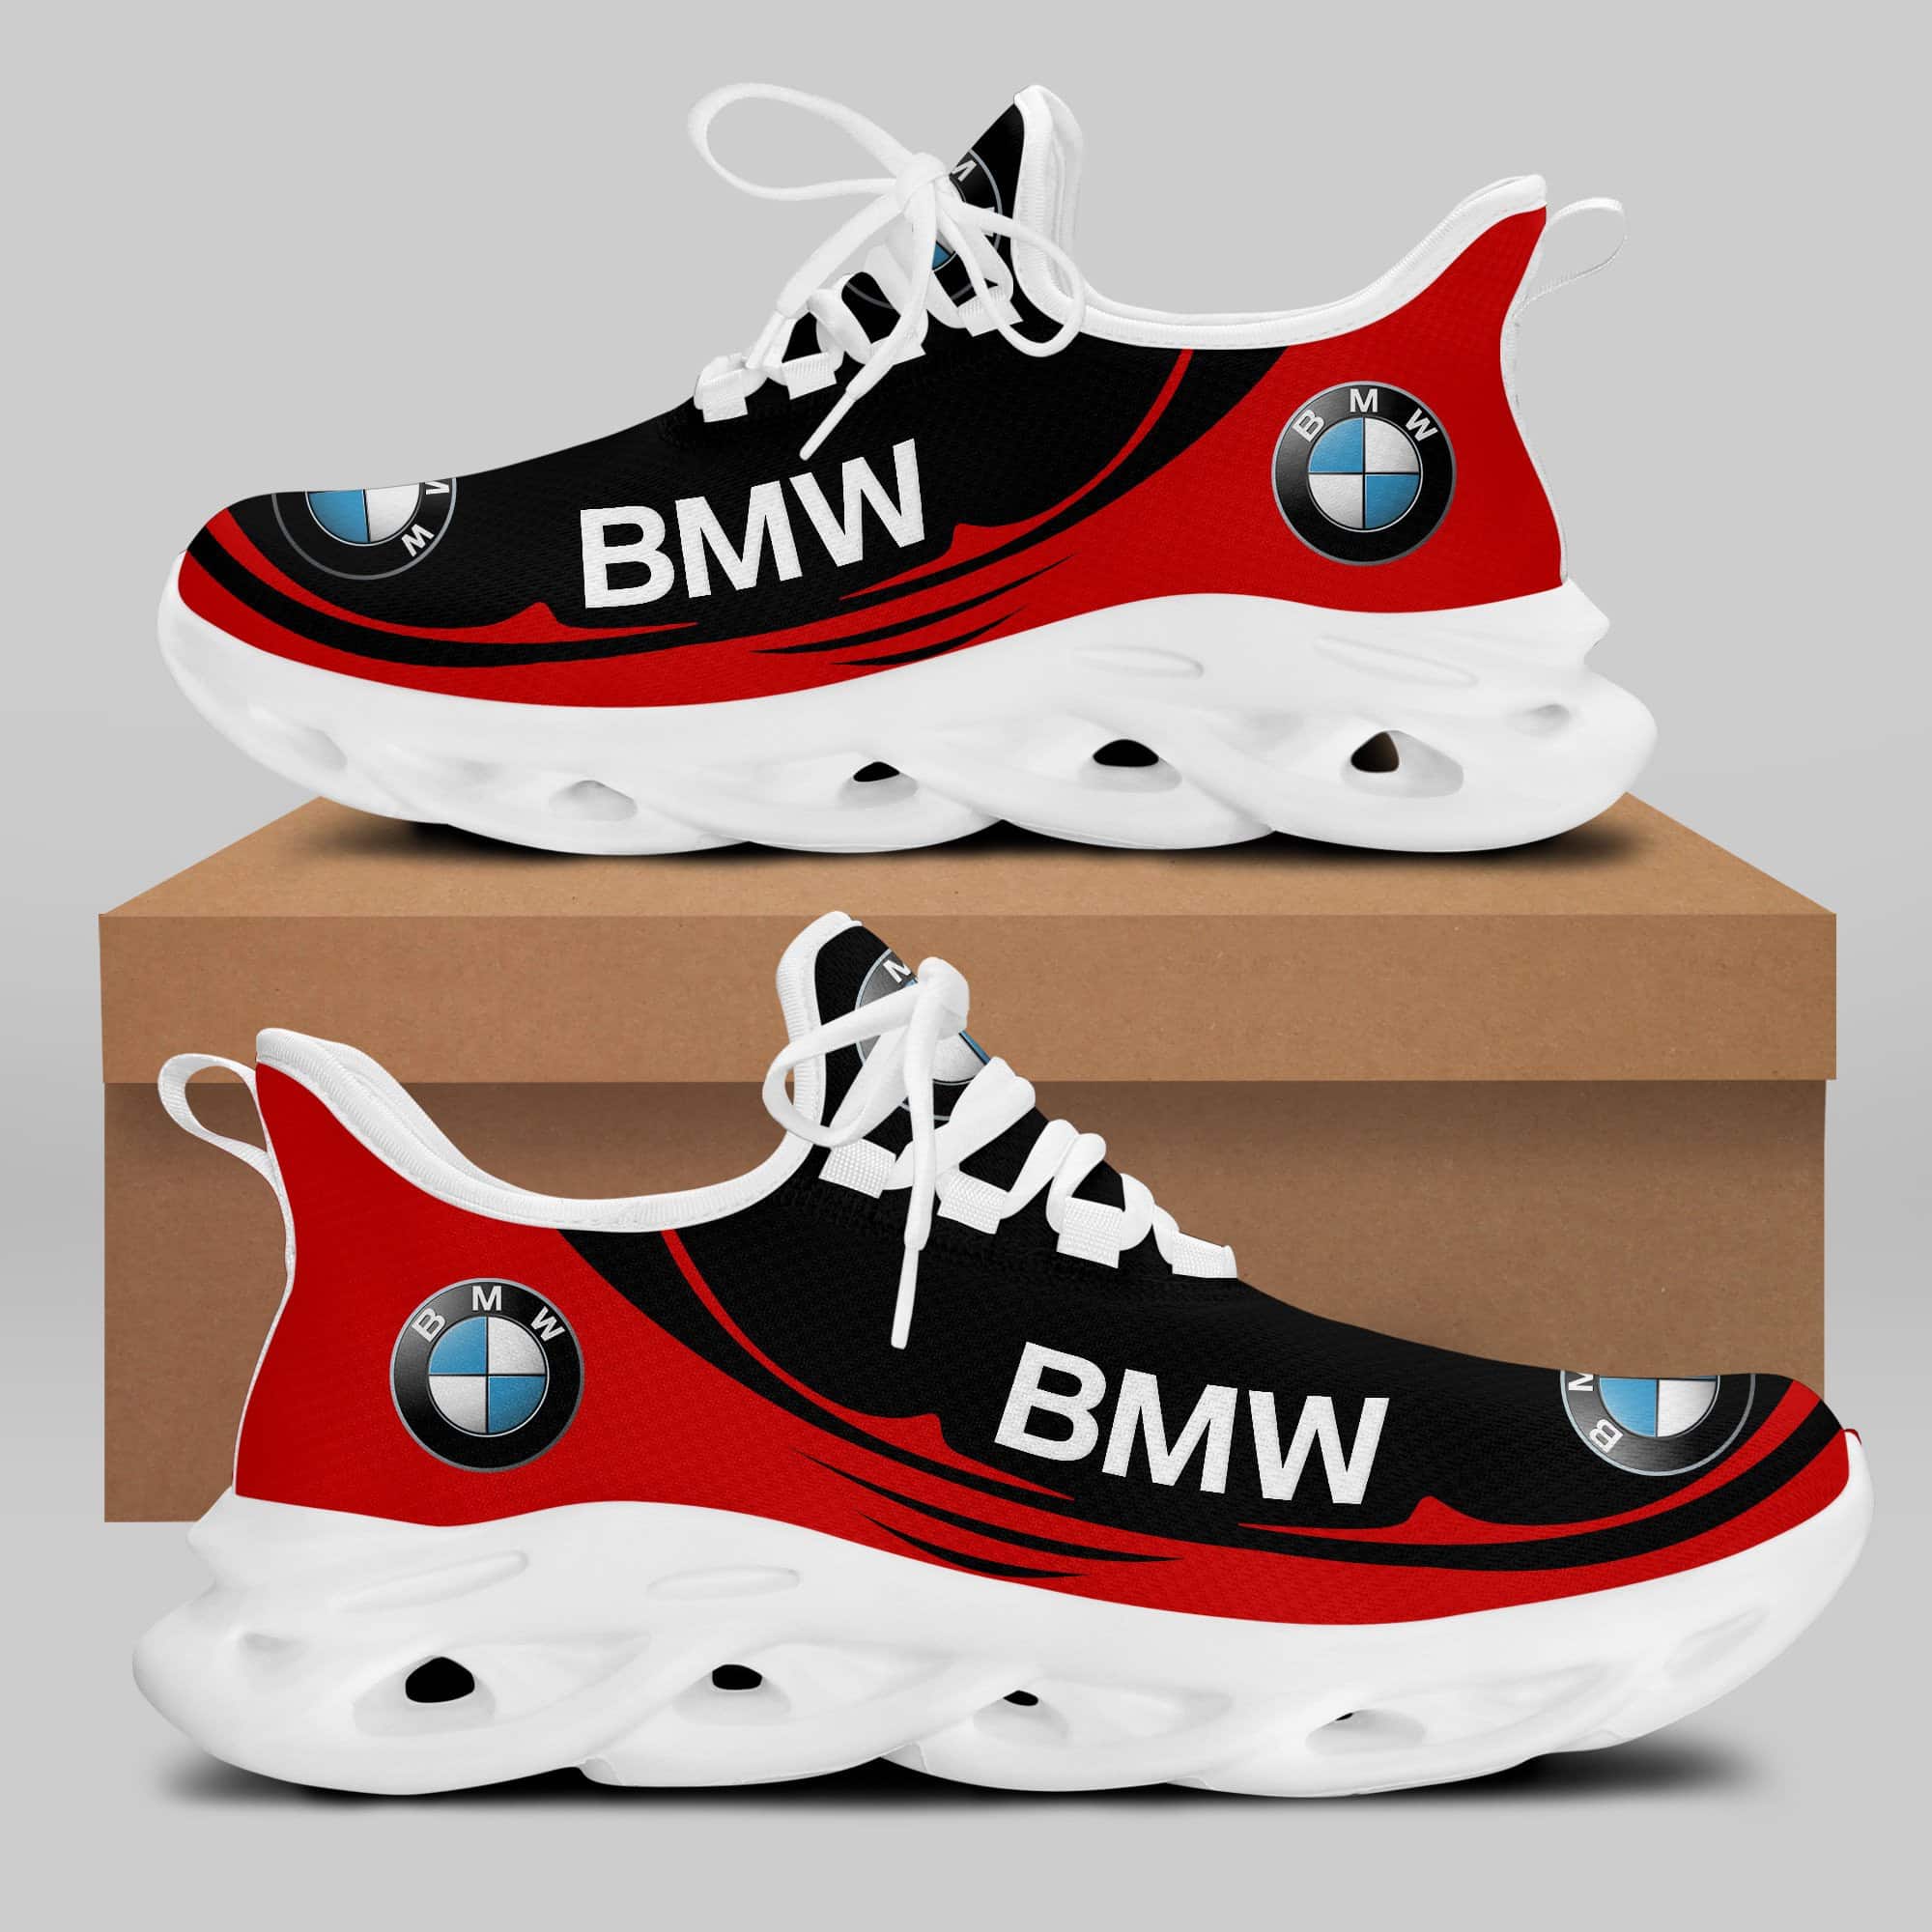 Bmw Running Shoes Max Soul Shoes Sneakers Ver 26 2